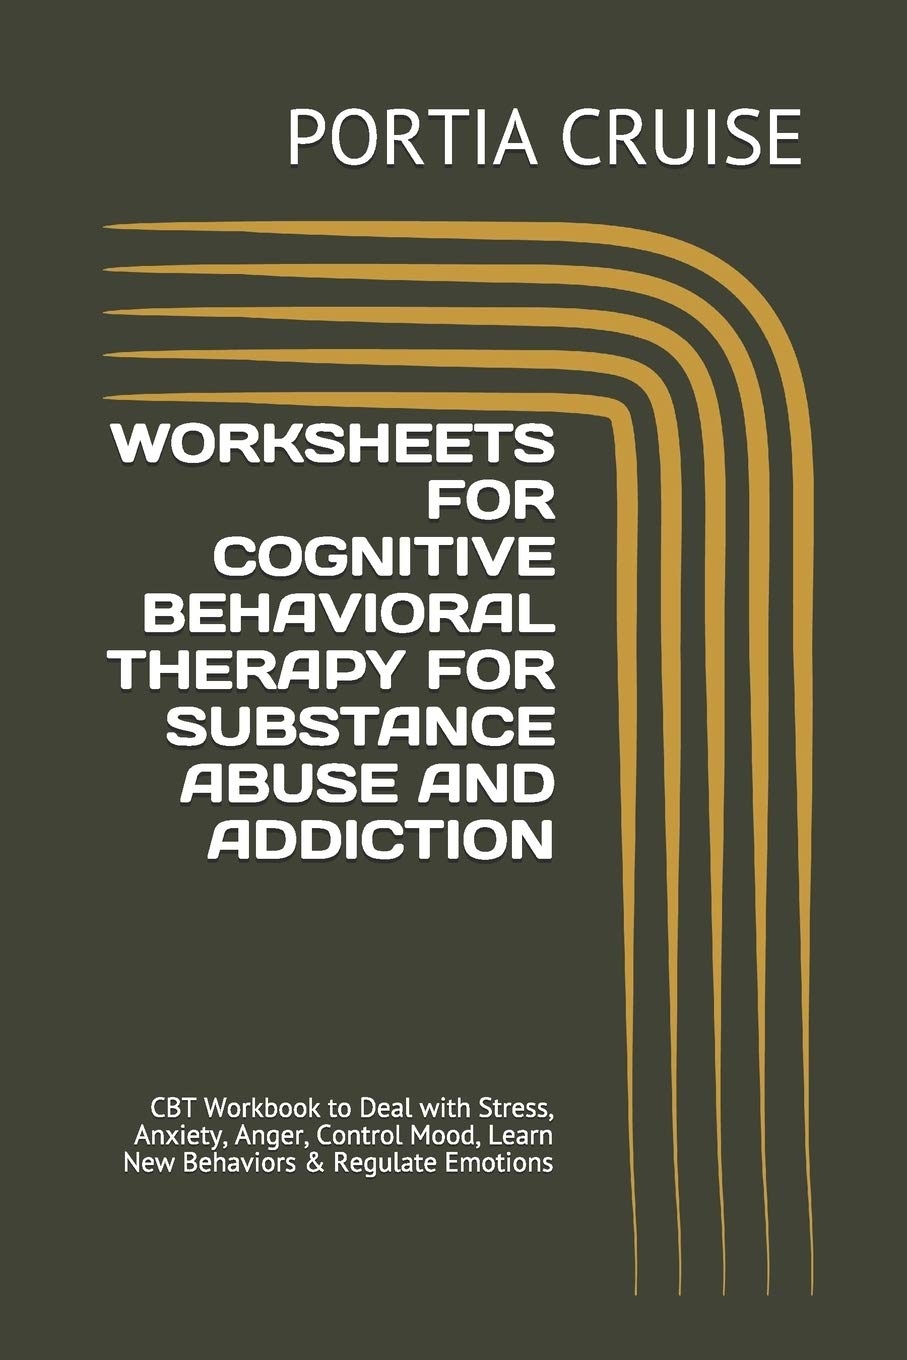 Buy Worksheets For Cognitive Behavioral Therapy For Substance Abuse And Addiction CBT Workbook To Deal With Stress Anxiety Anger Control Mood Learn New Behaviors Regulate Emotions Book Online At Low Prices